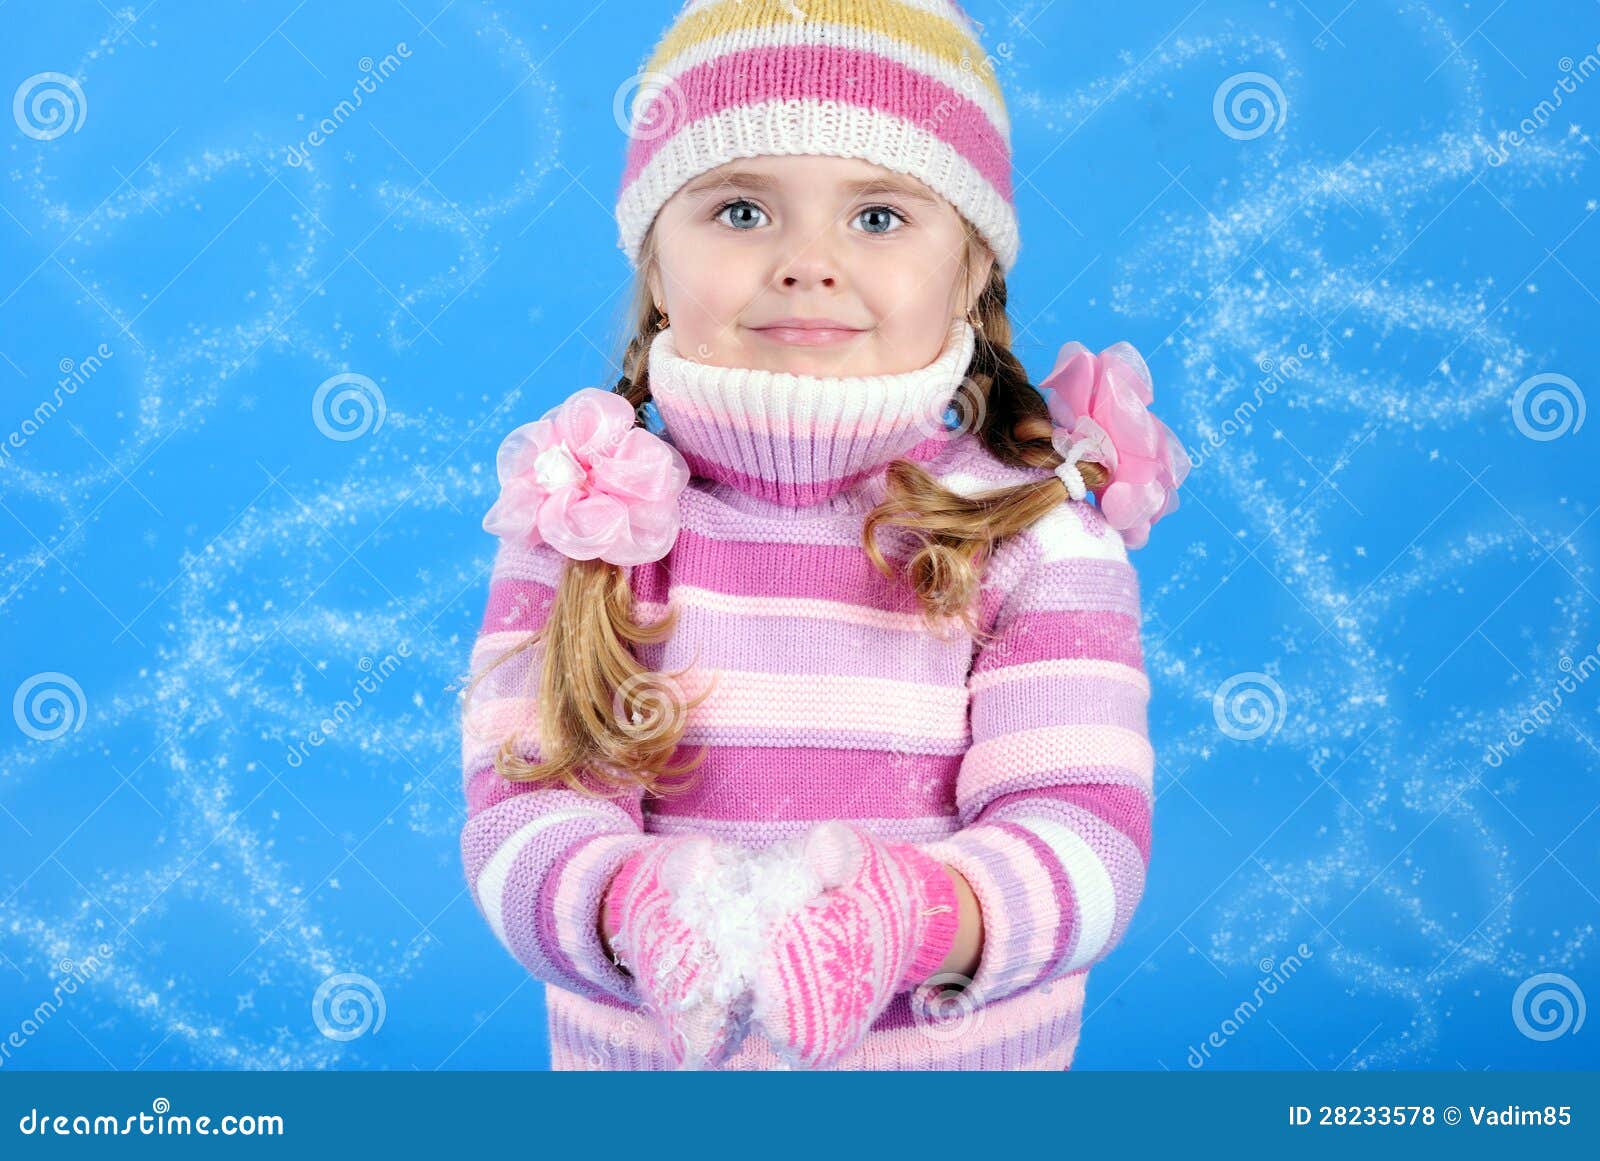 Little Girl in a Sweater with the Snow Stock Photo - Image of knitted ...